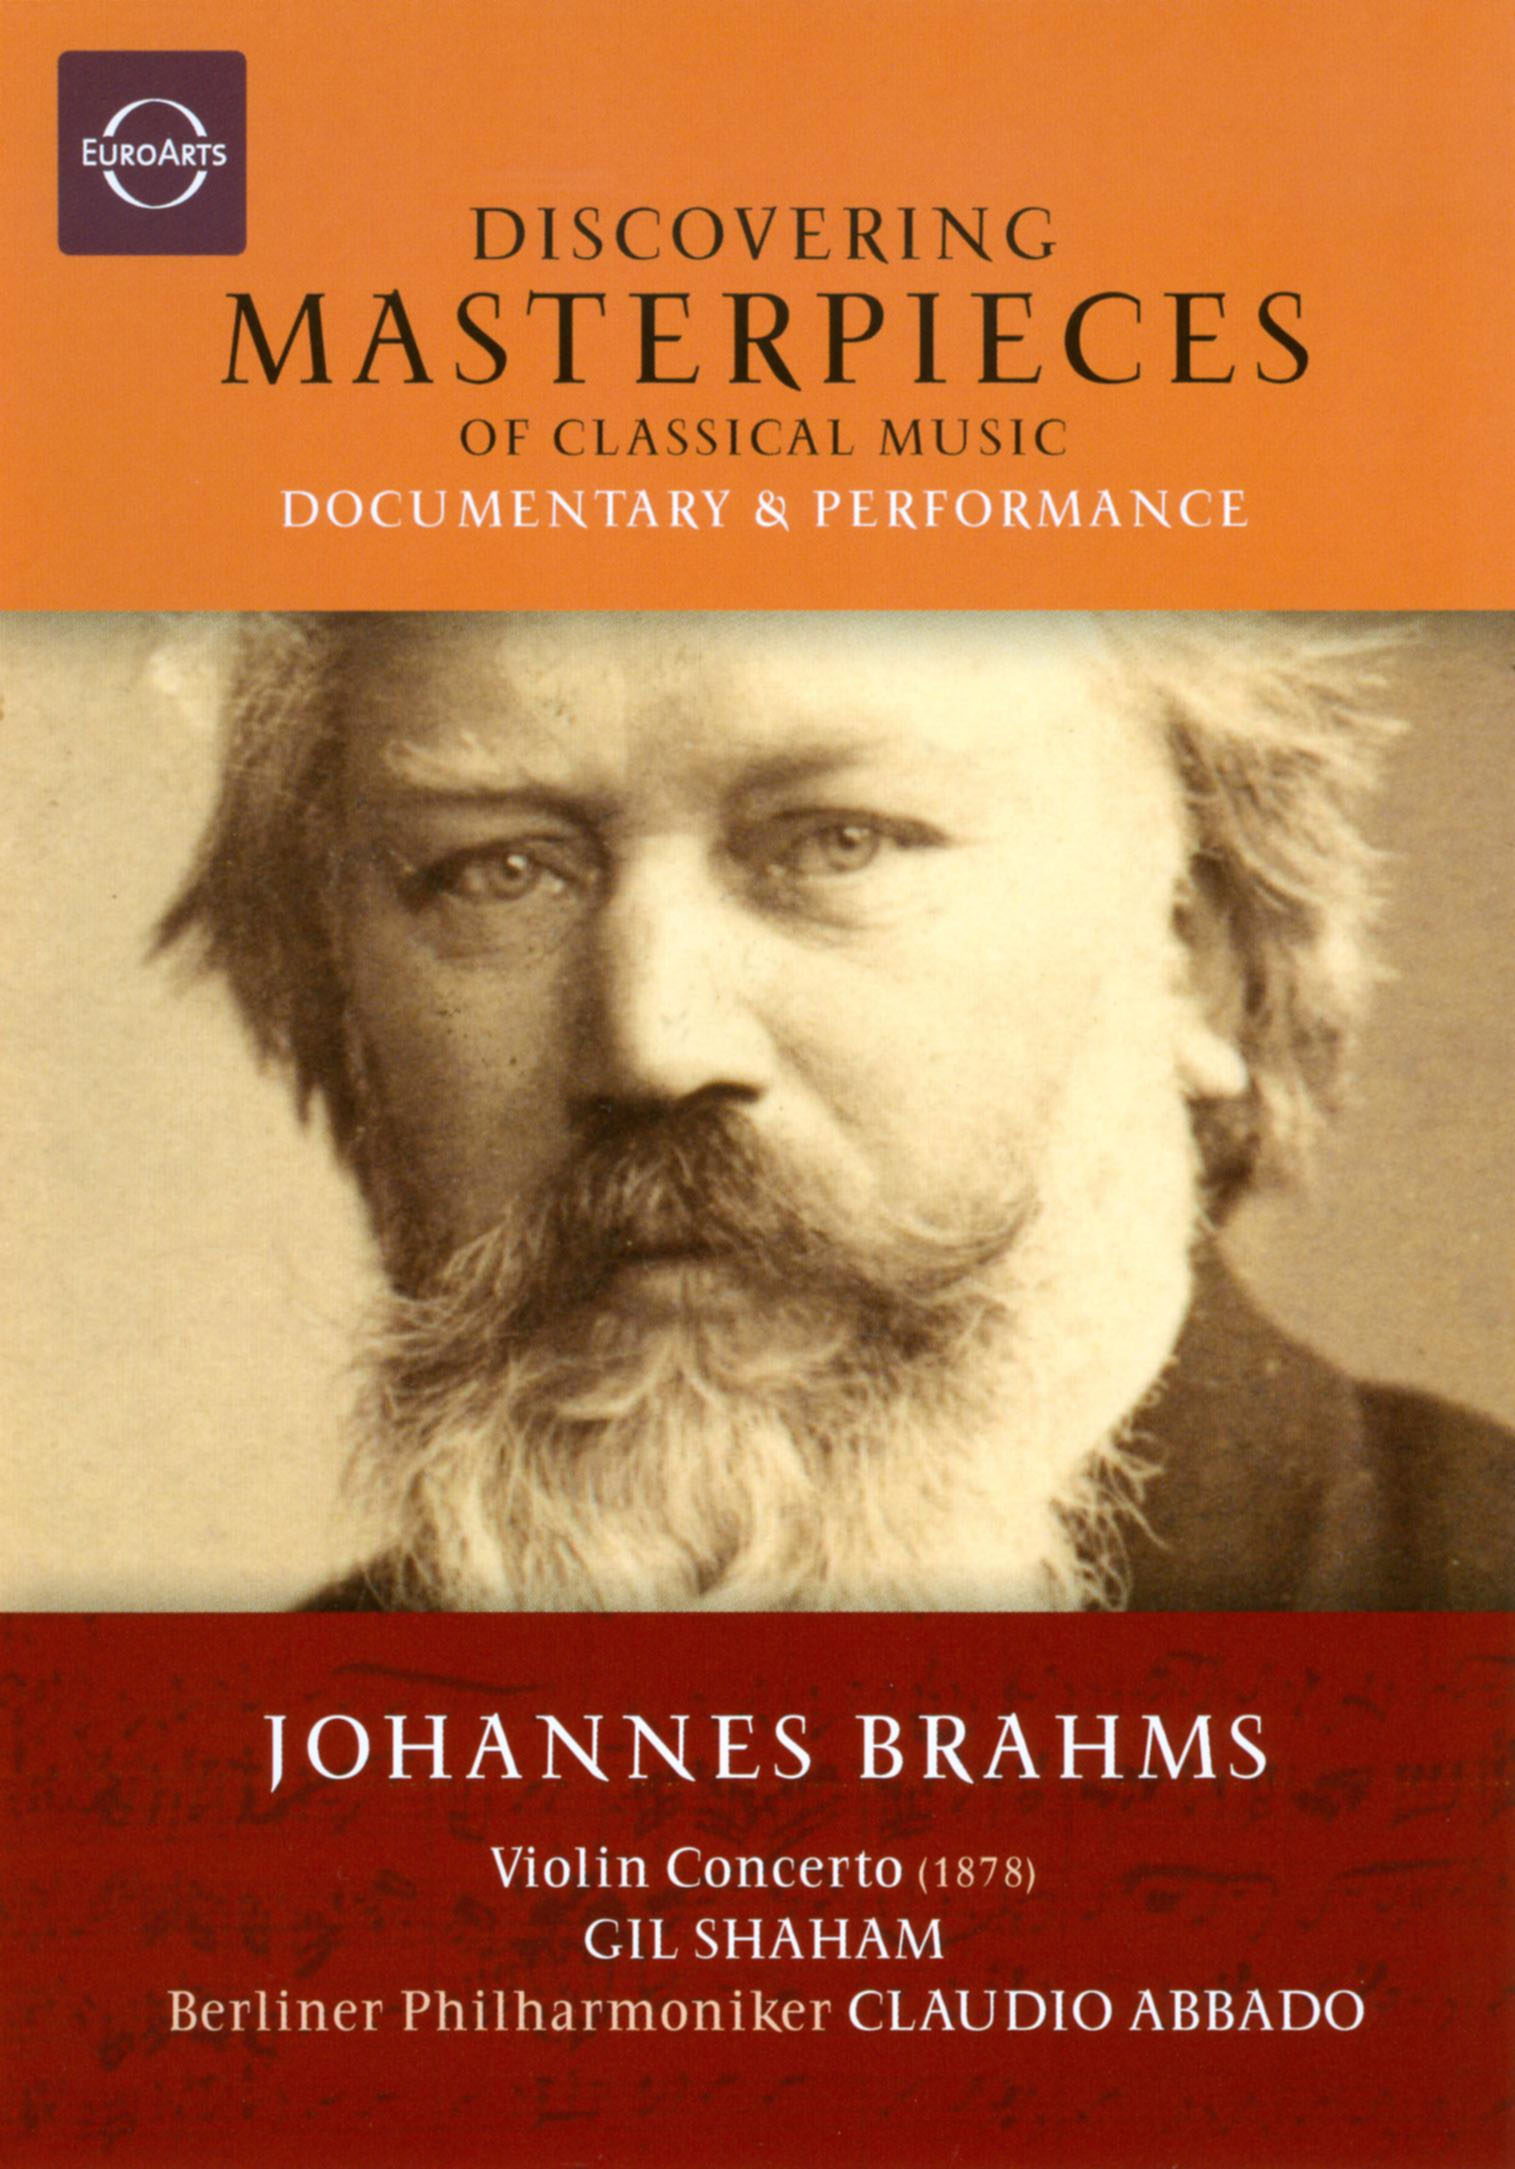 discovering-masterpieces-of-classical-music-johannes-brahms-violin